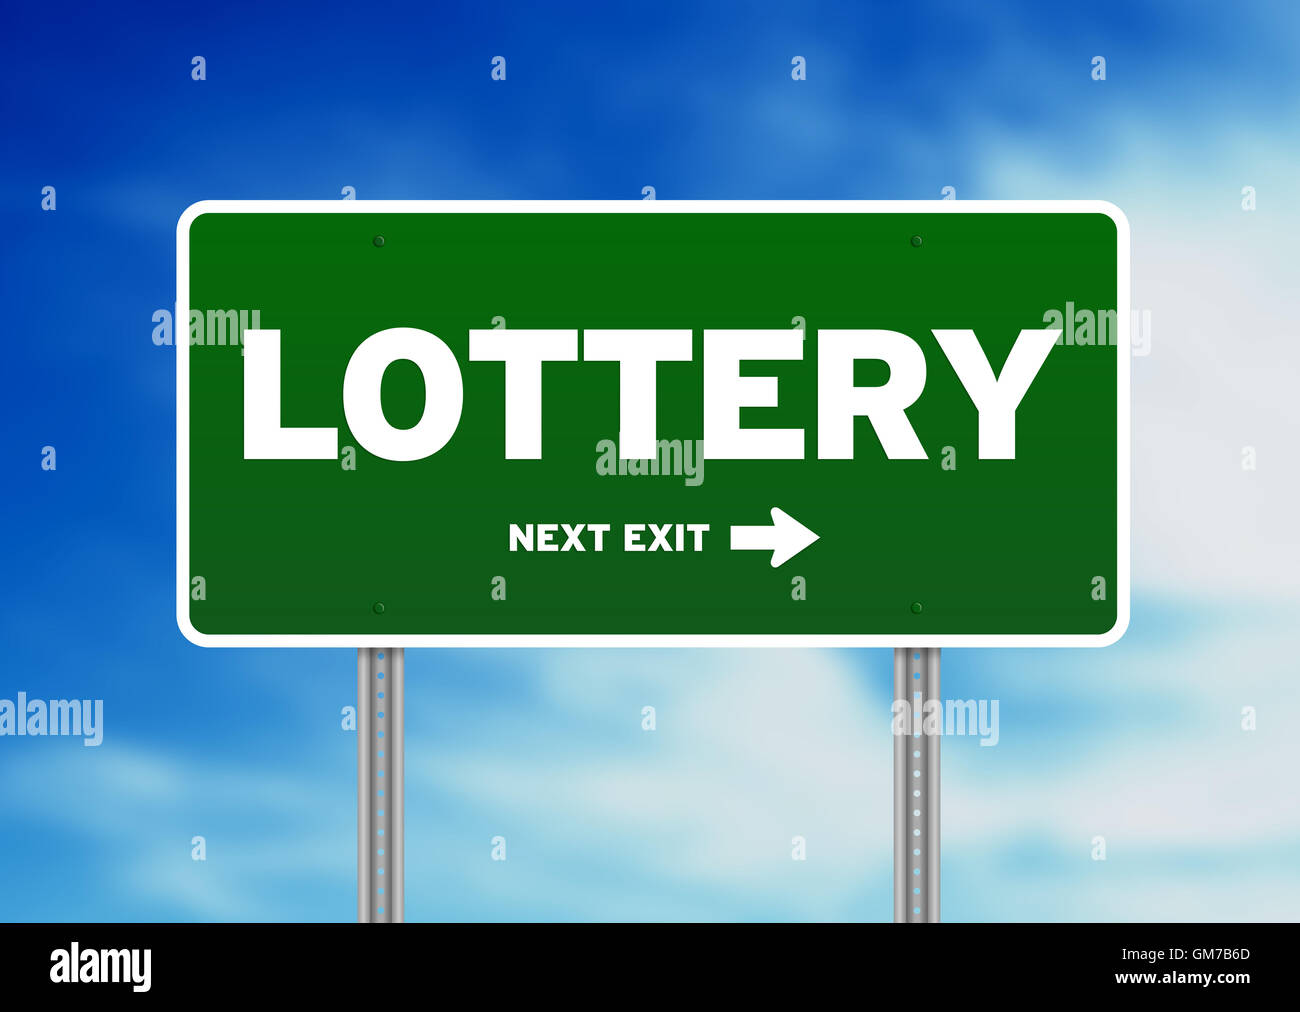 Lottery Road Sign Stock Photo